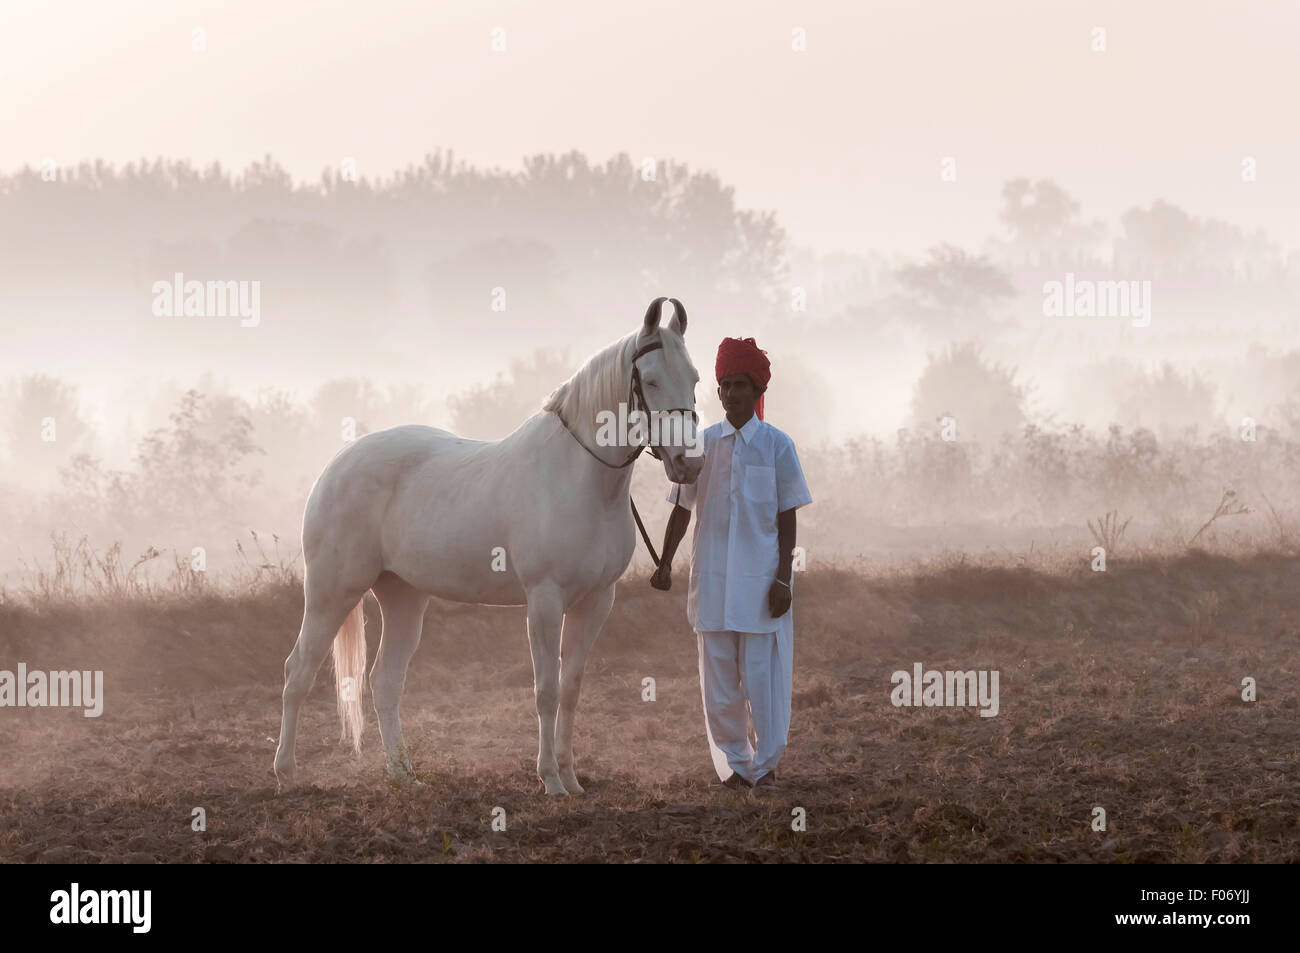 Indian man stands alongside his marwari horse at dawn in a field with trees and mist in the background Stock Photo